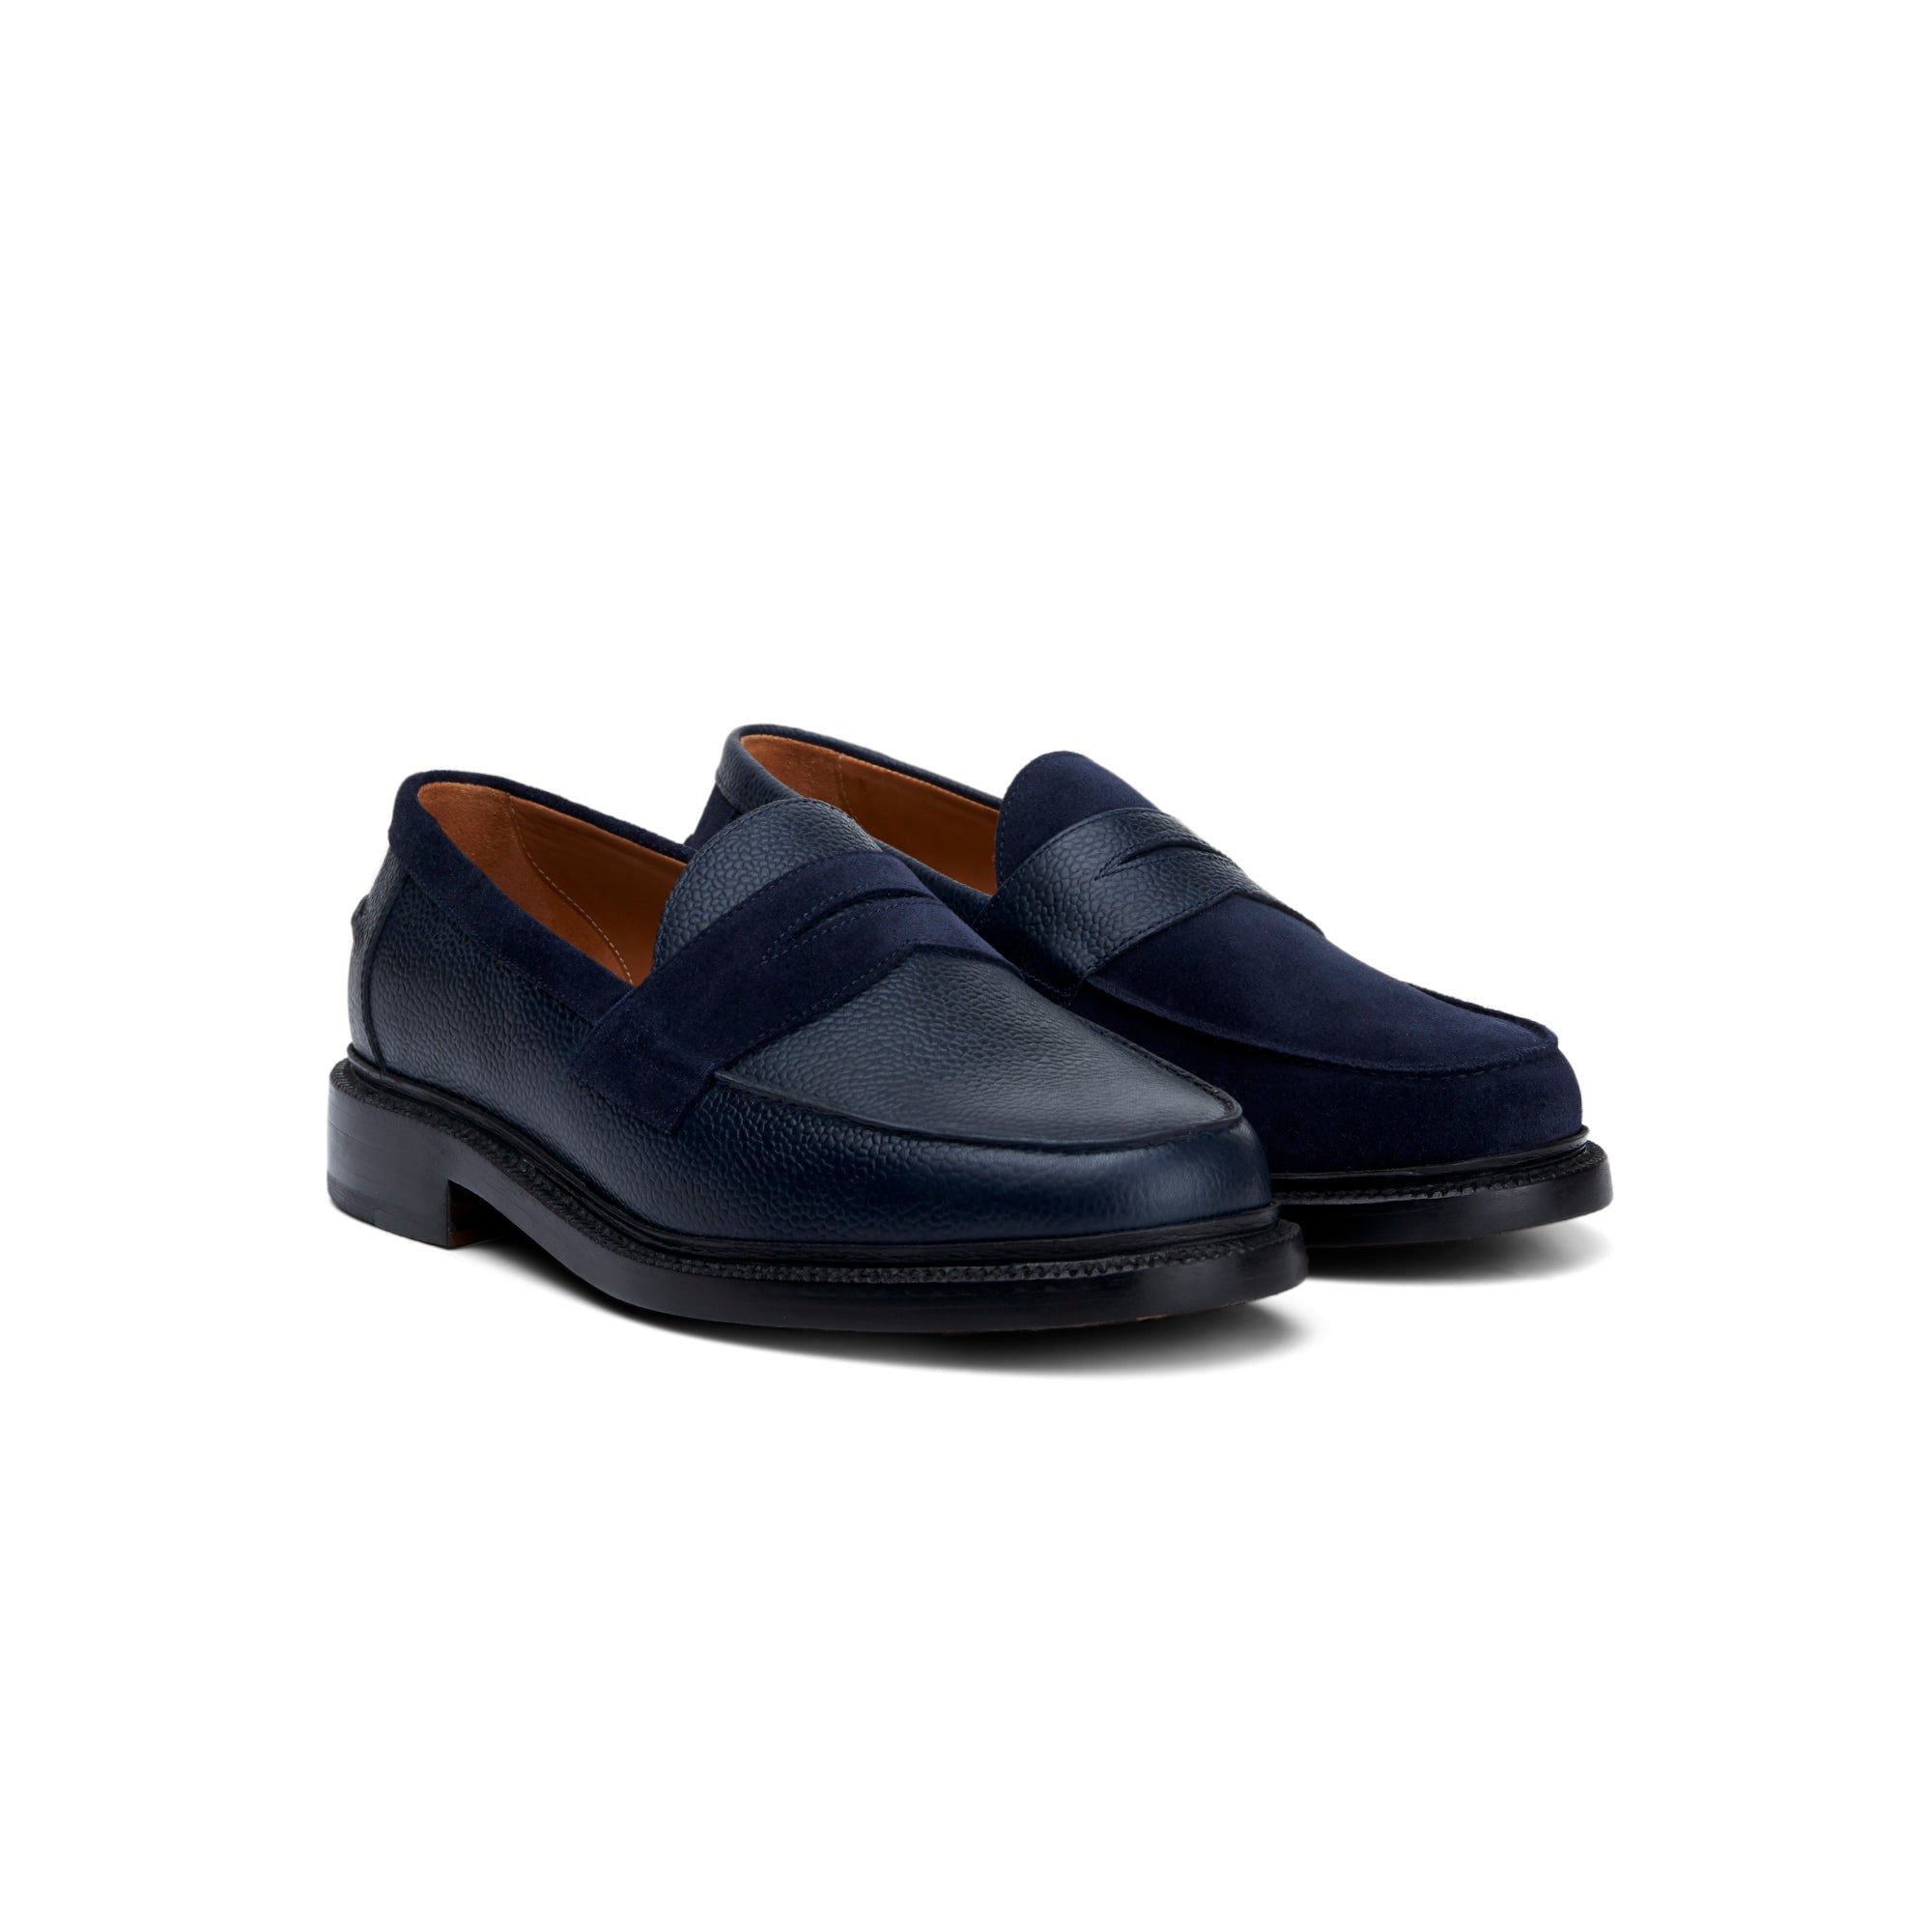 Collin Oversized Sole Penny Loafers Black